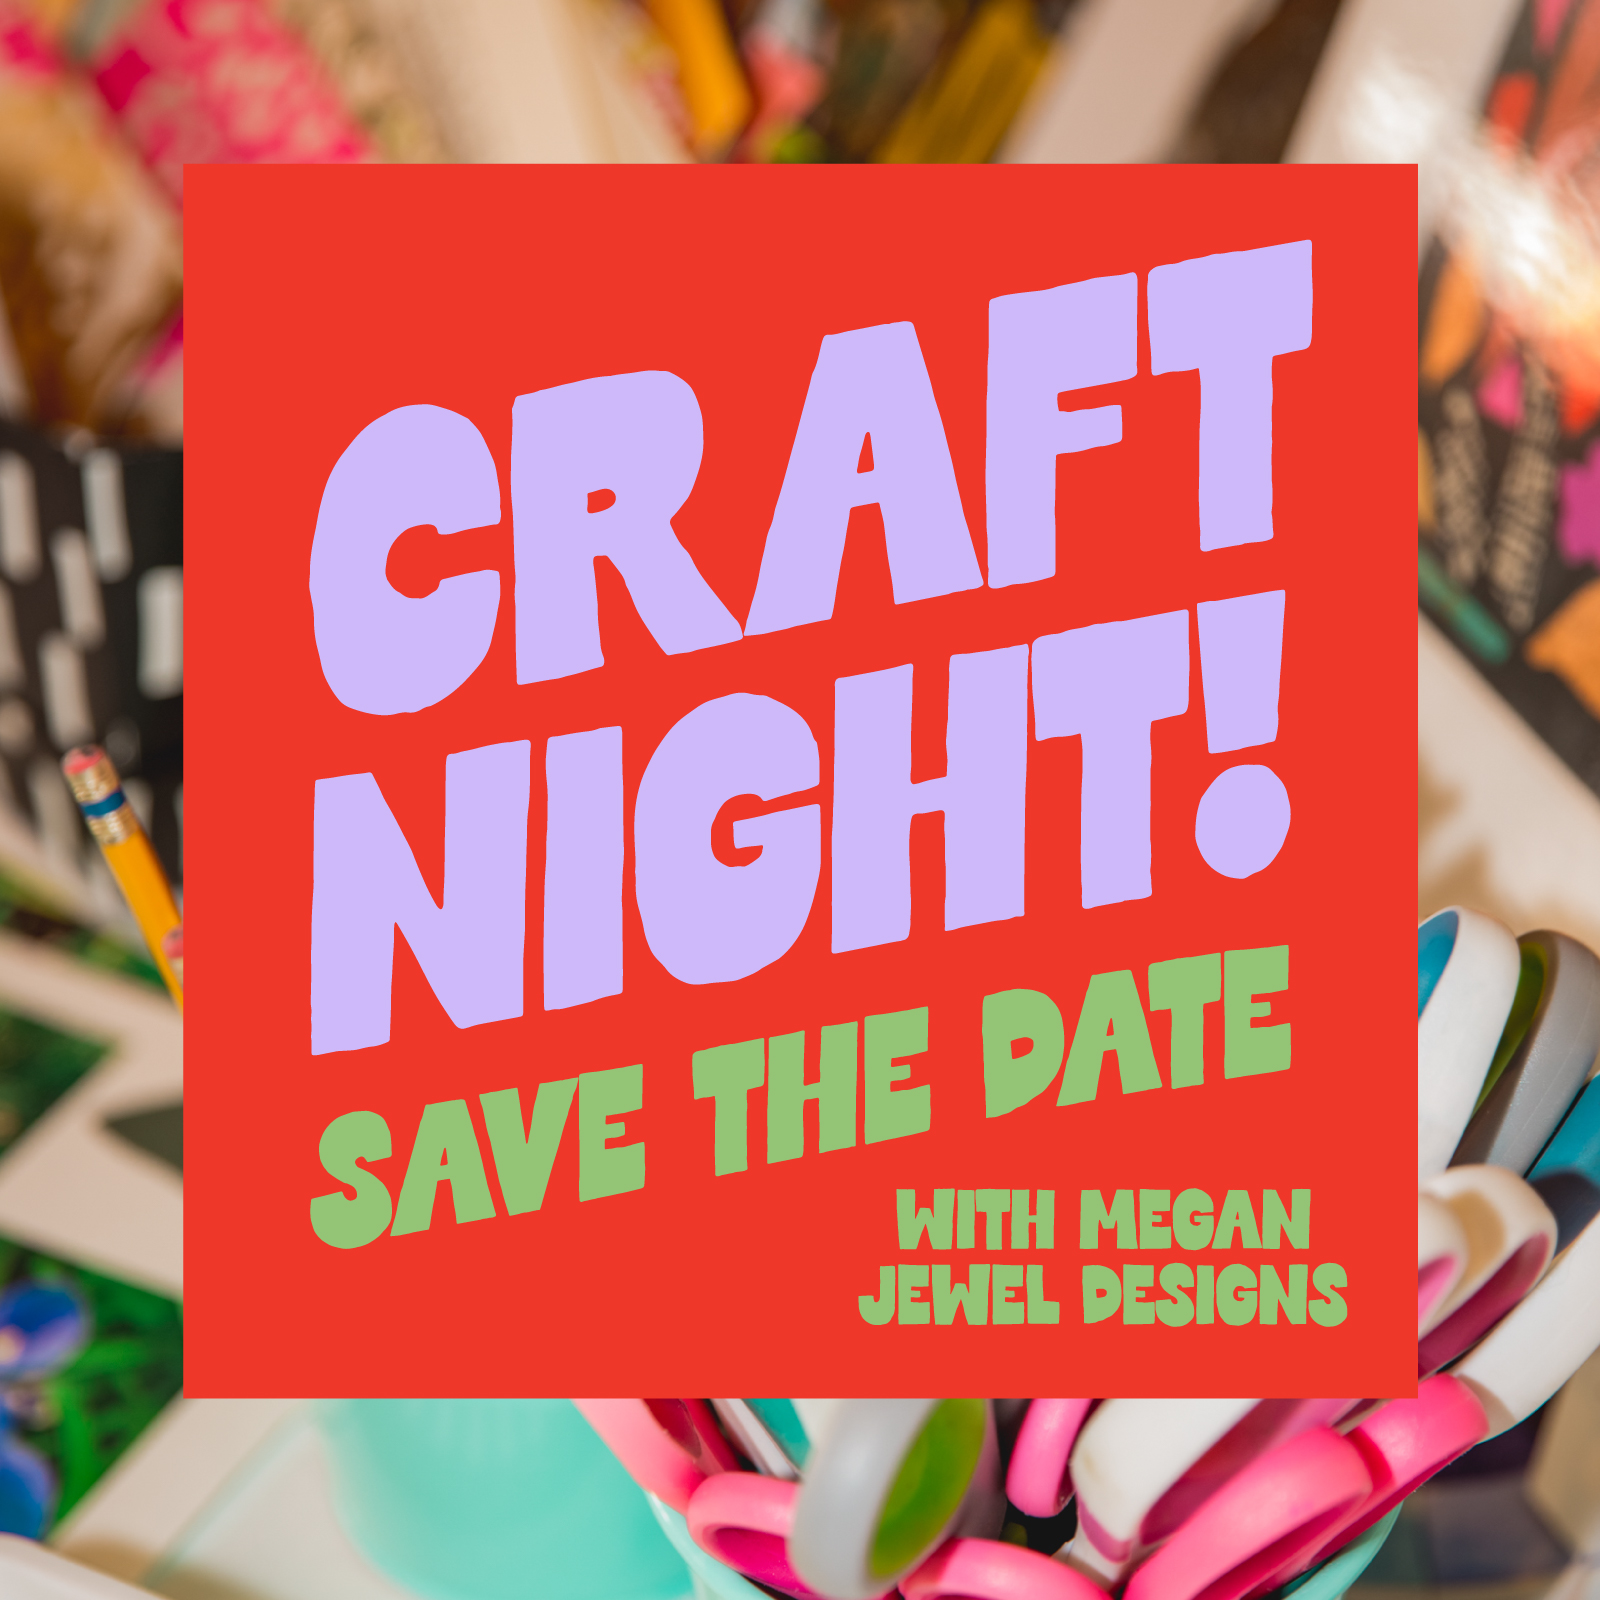 Craft Night: save the date flyer for December